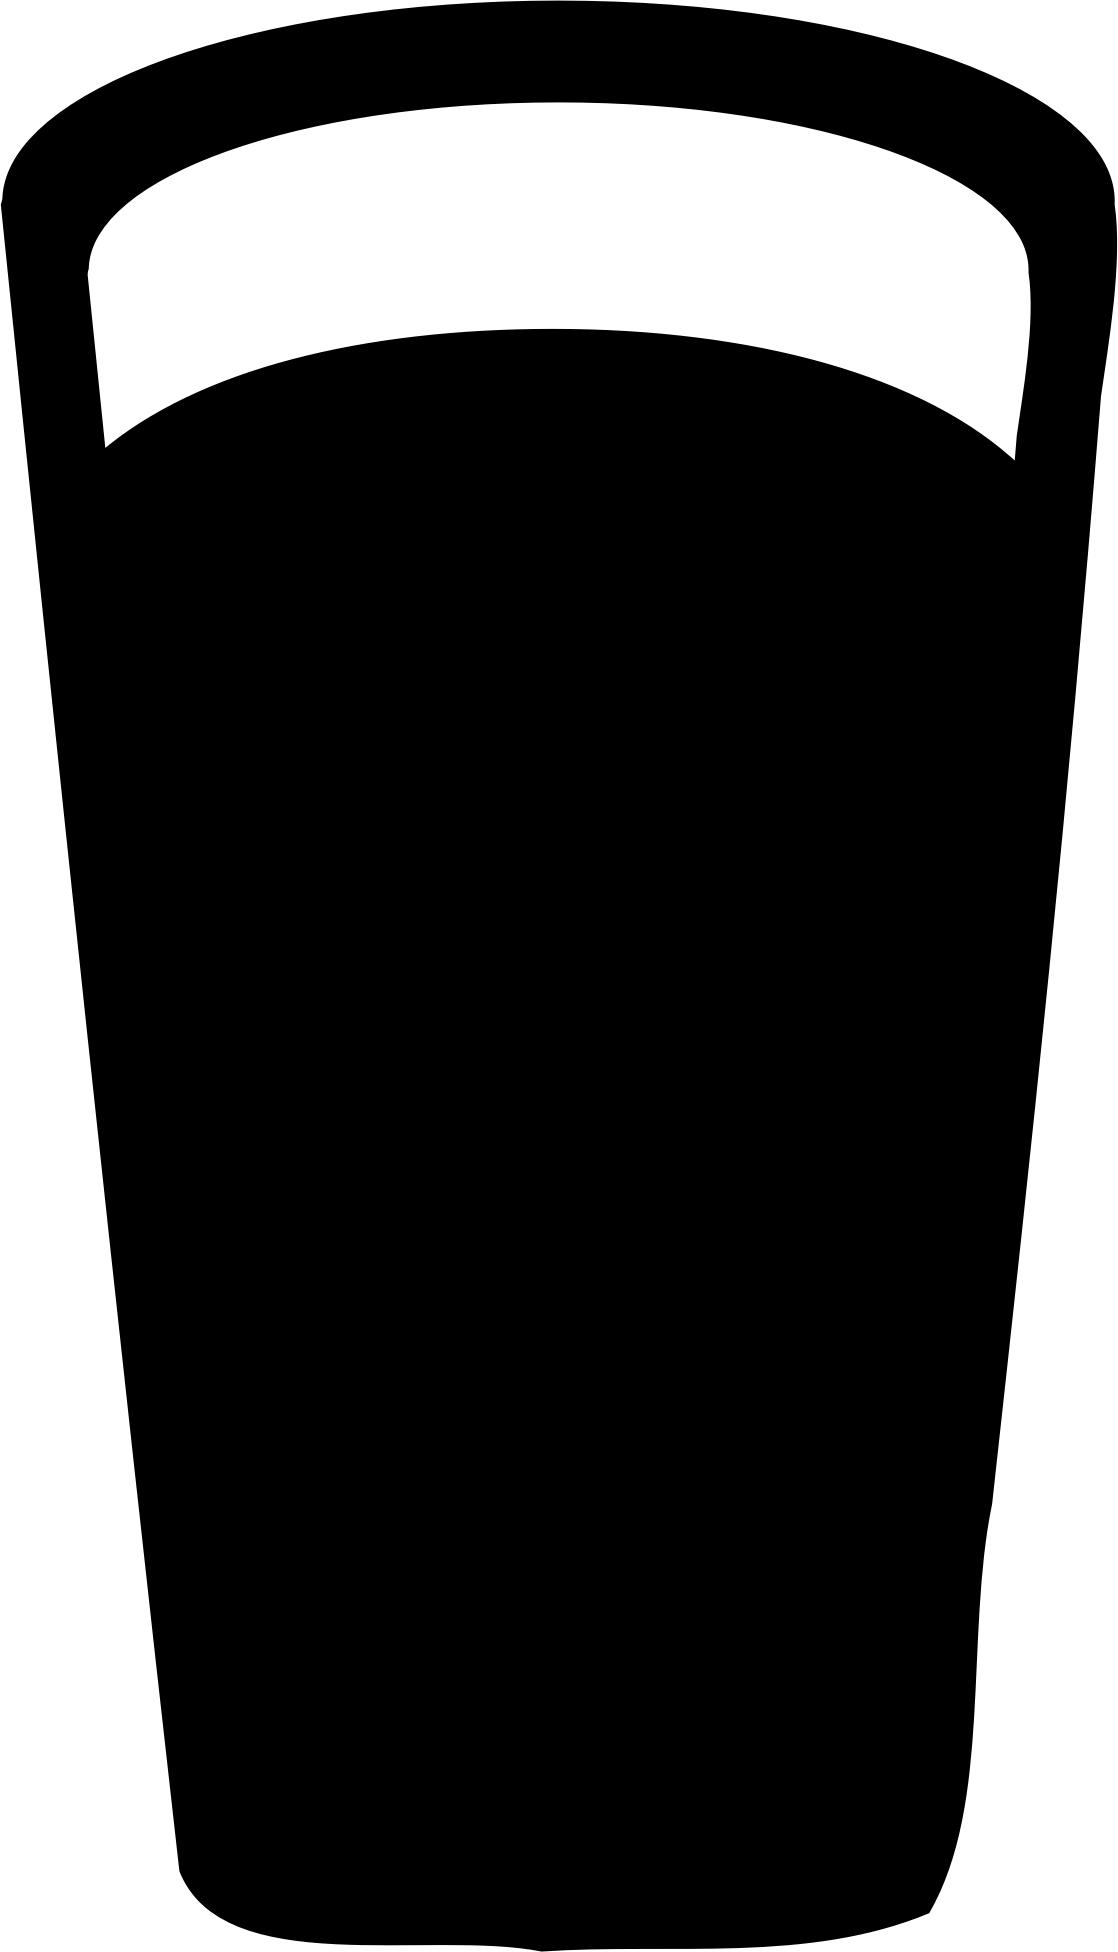 A Pint of Stout Beer png